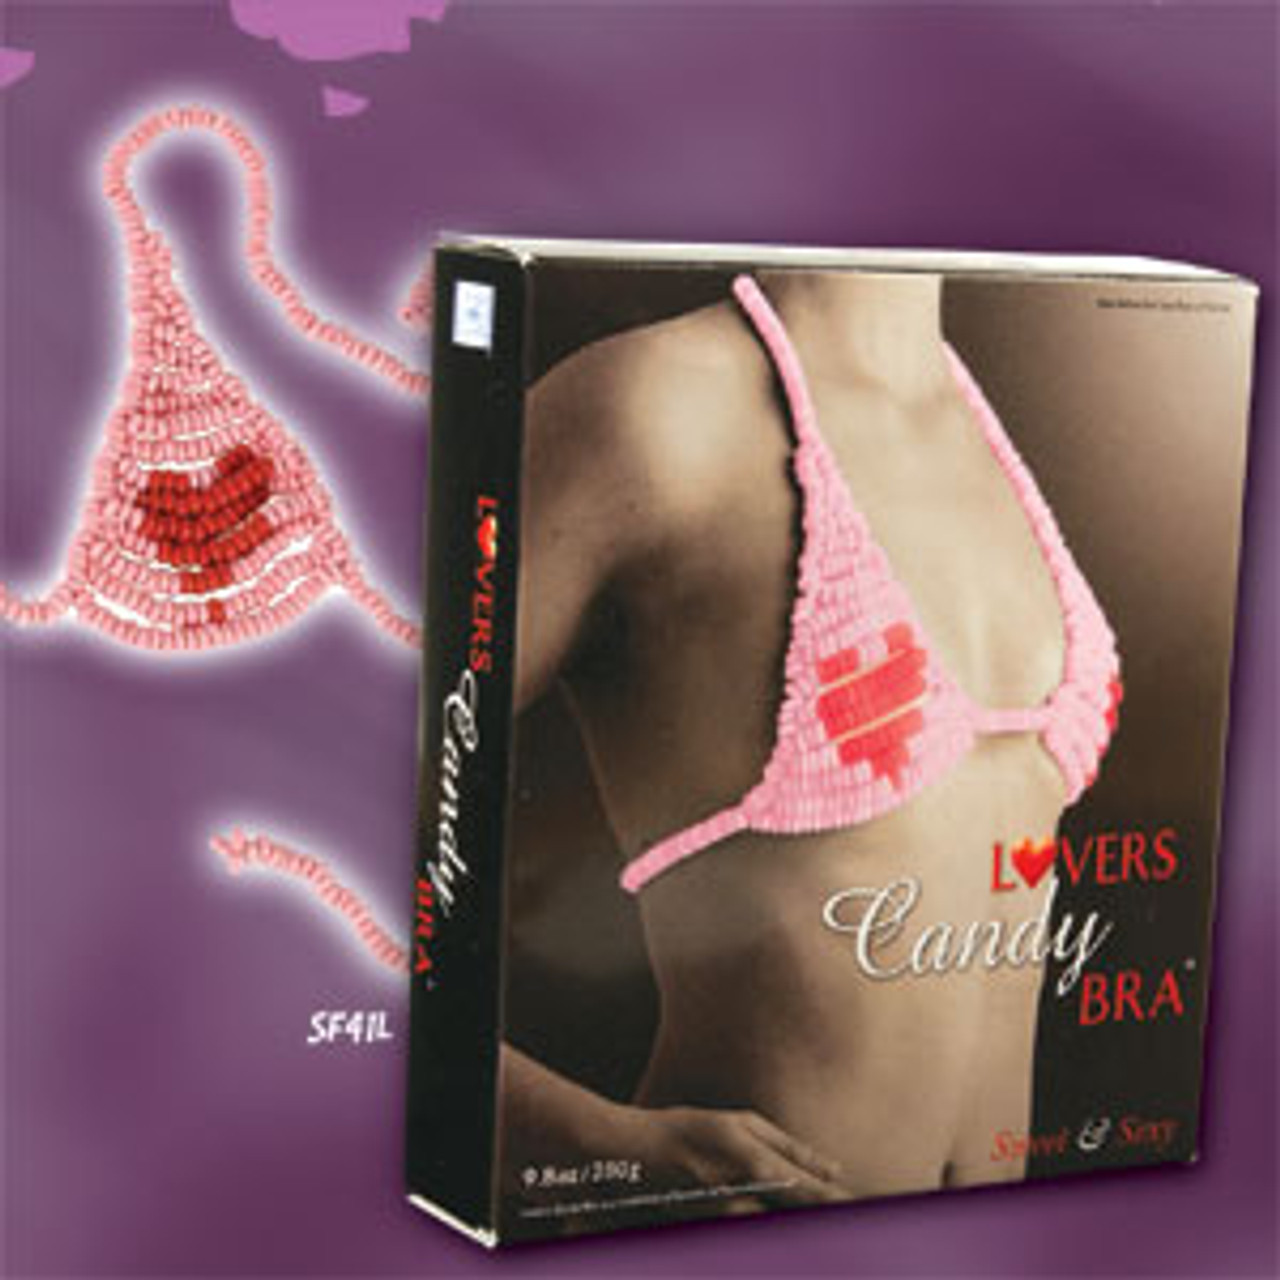 Lovers Candy Edible G String Flavored One Size Fits Most